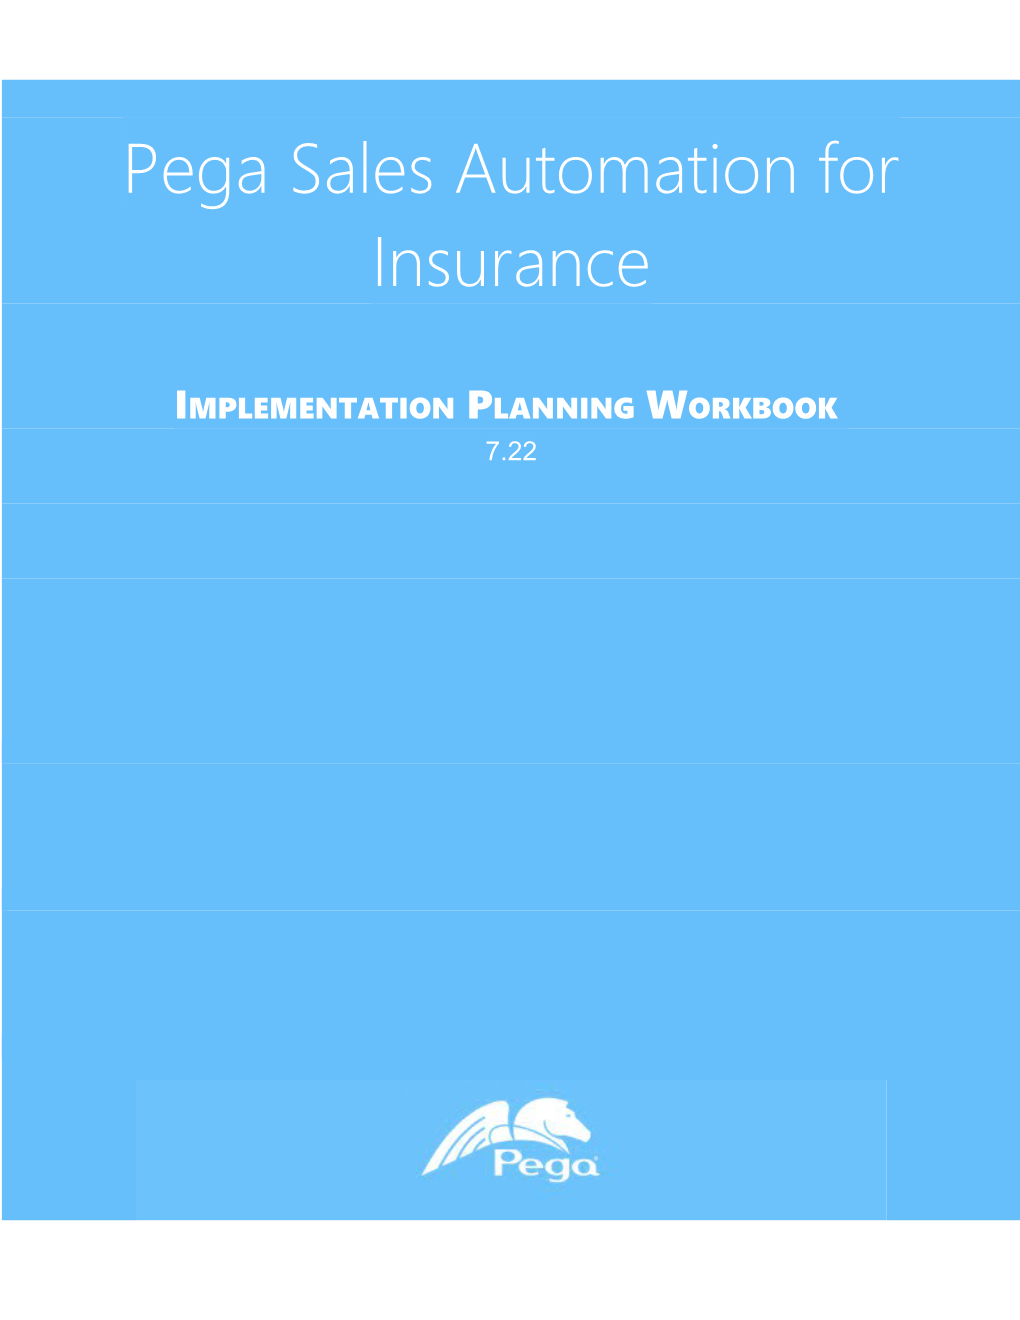 Pega Sales Automation for Insurance